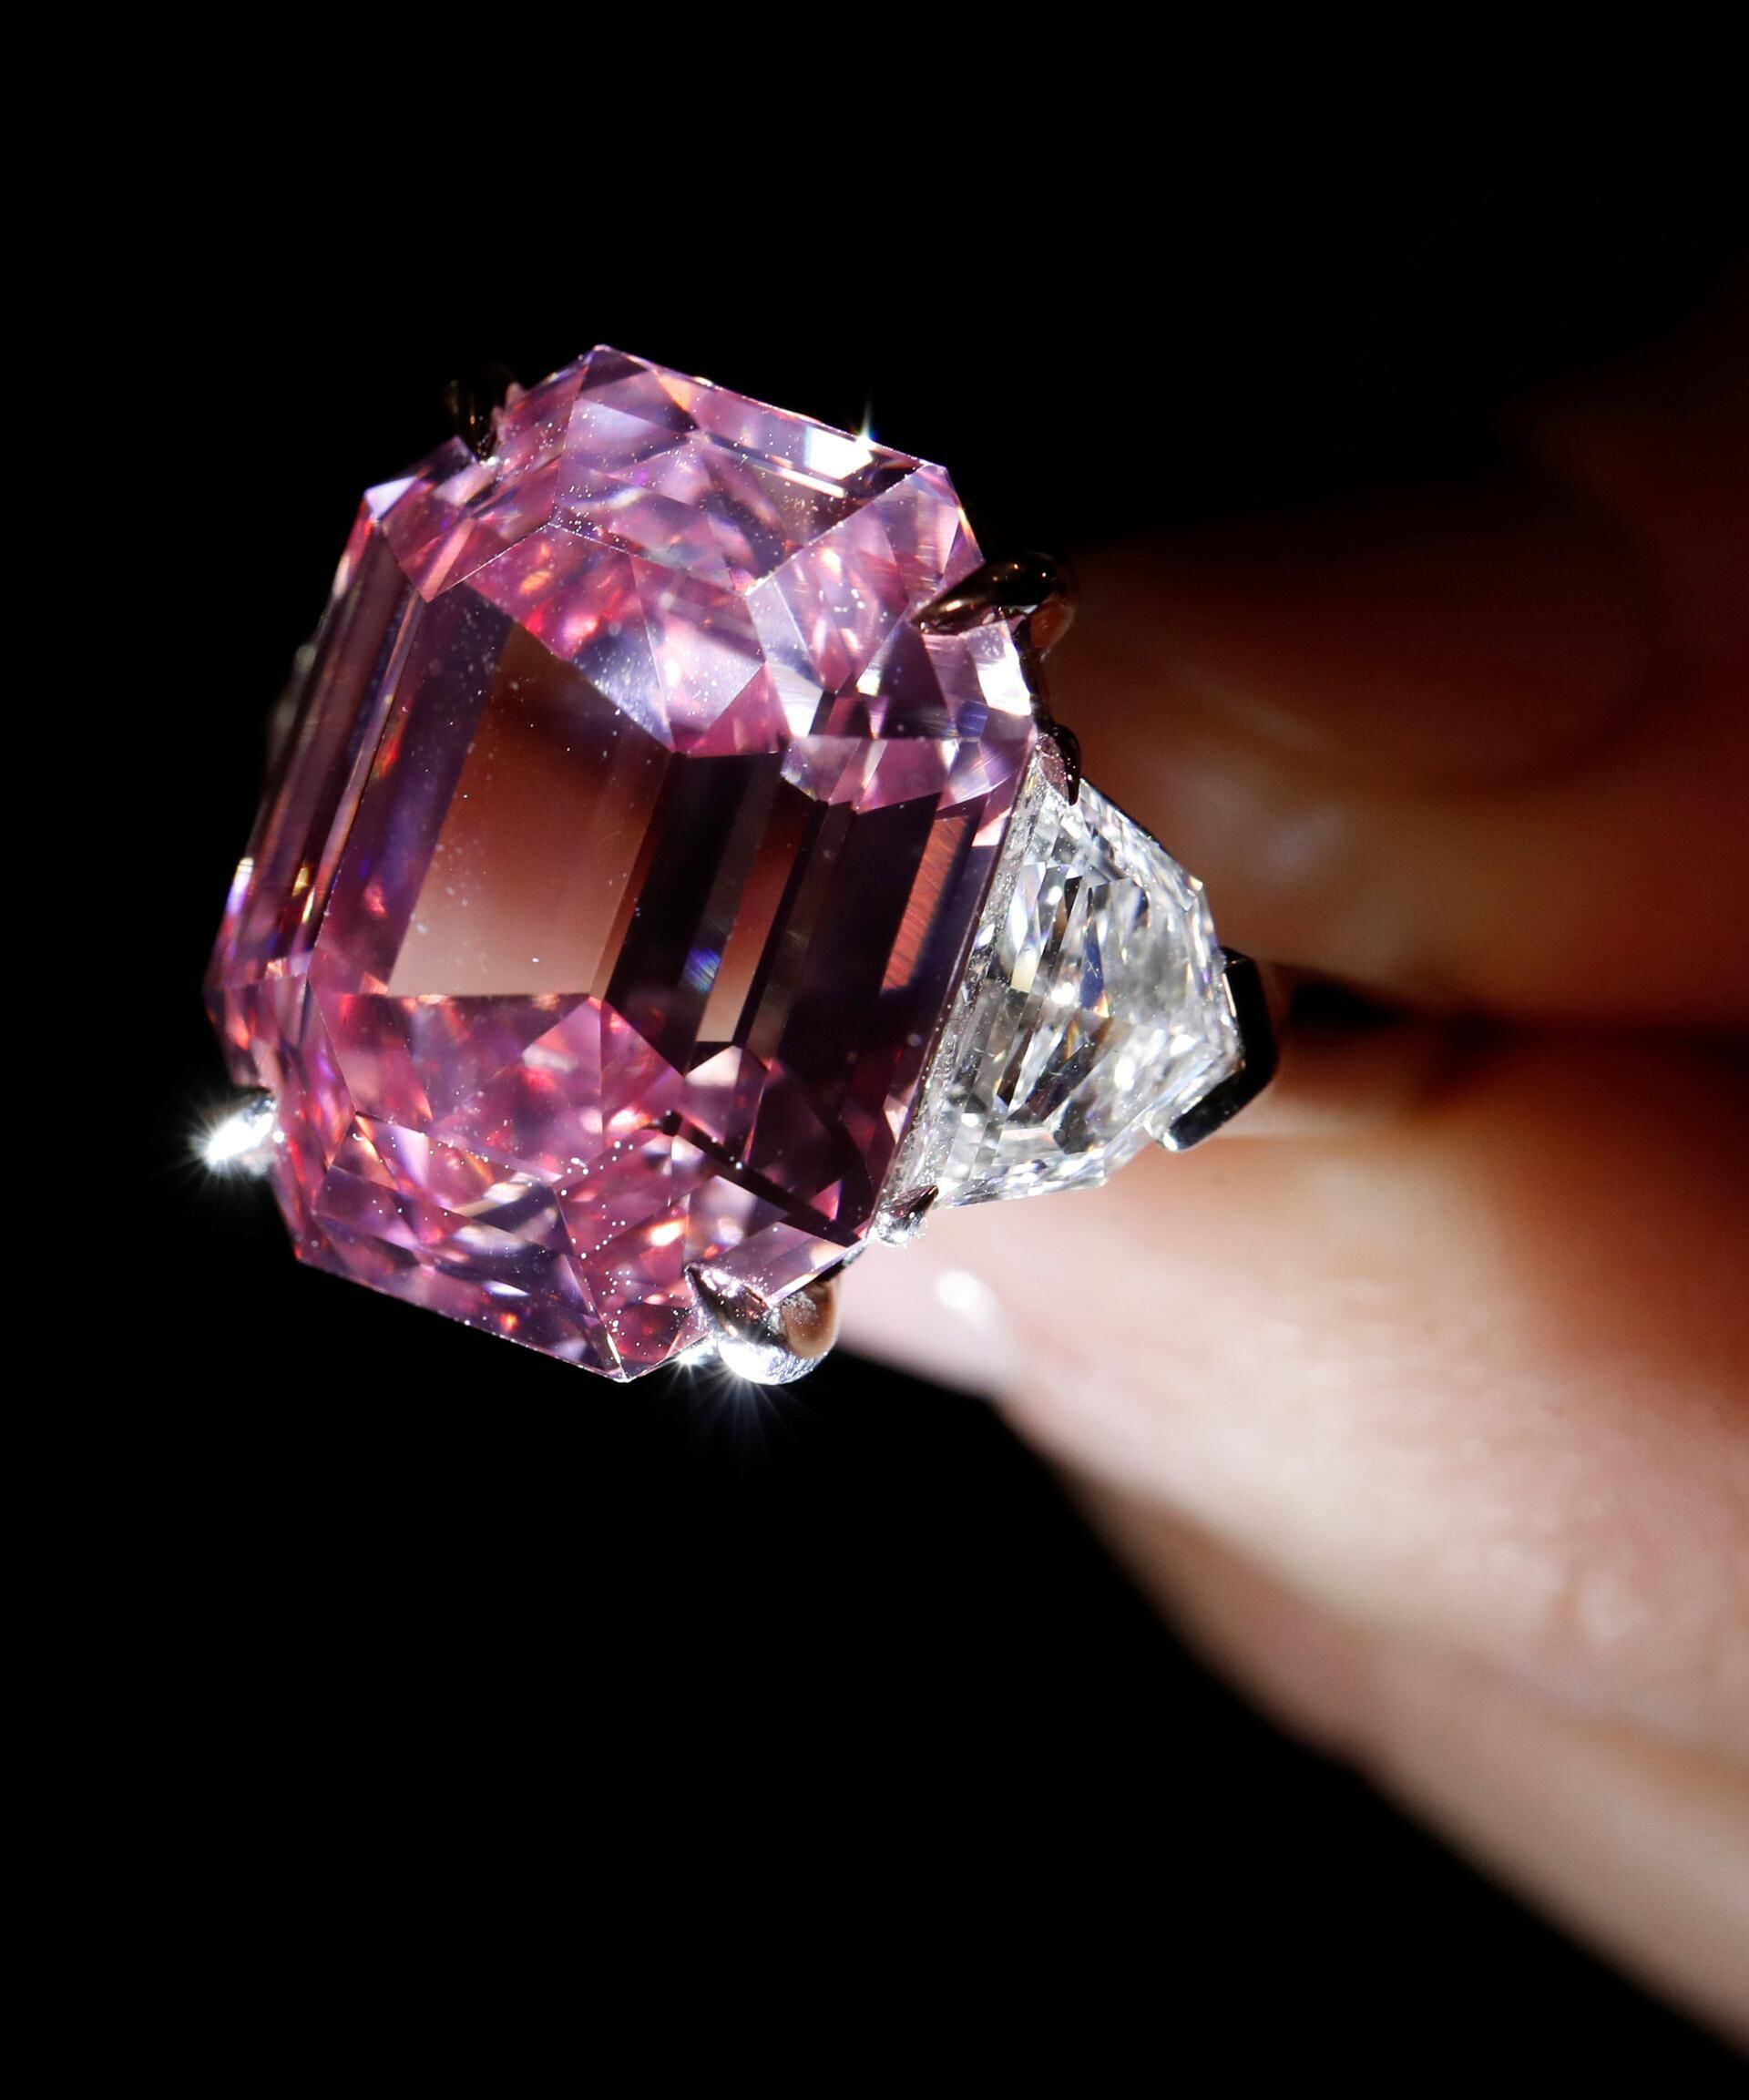 Christie's to Bring Super Rare Pink Legacy Diamond to Auction